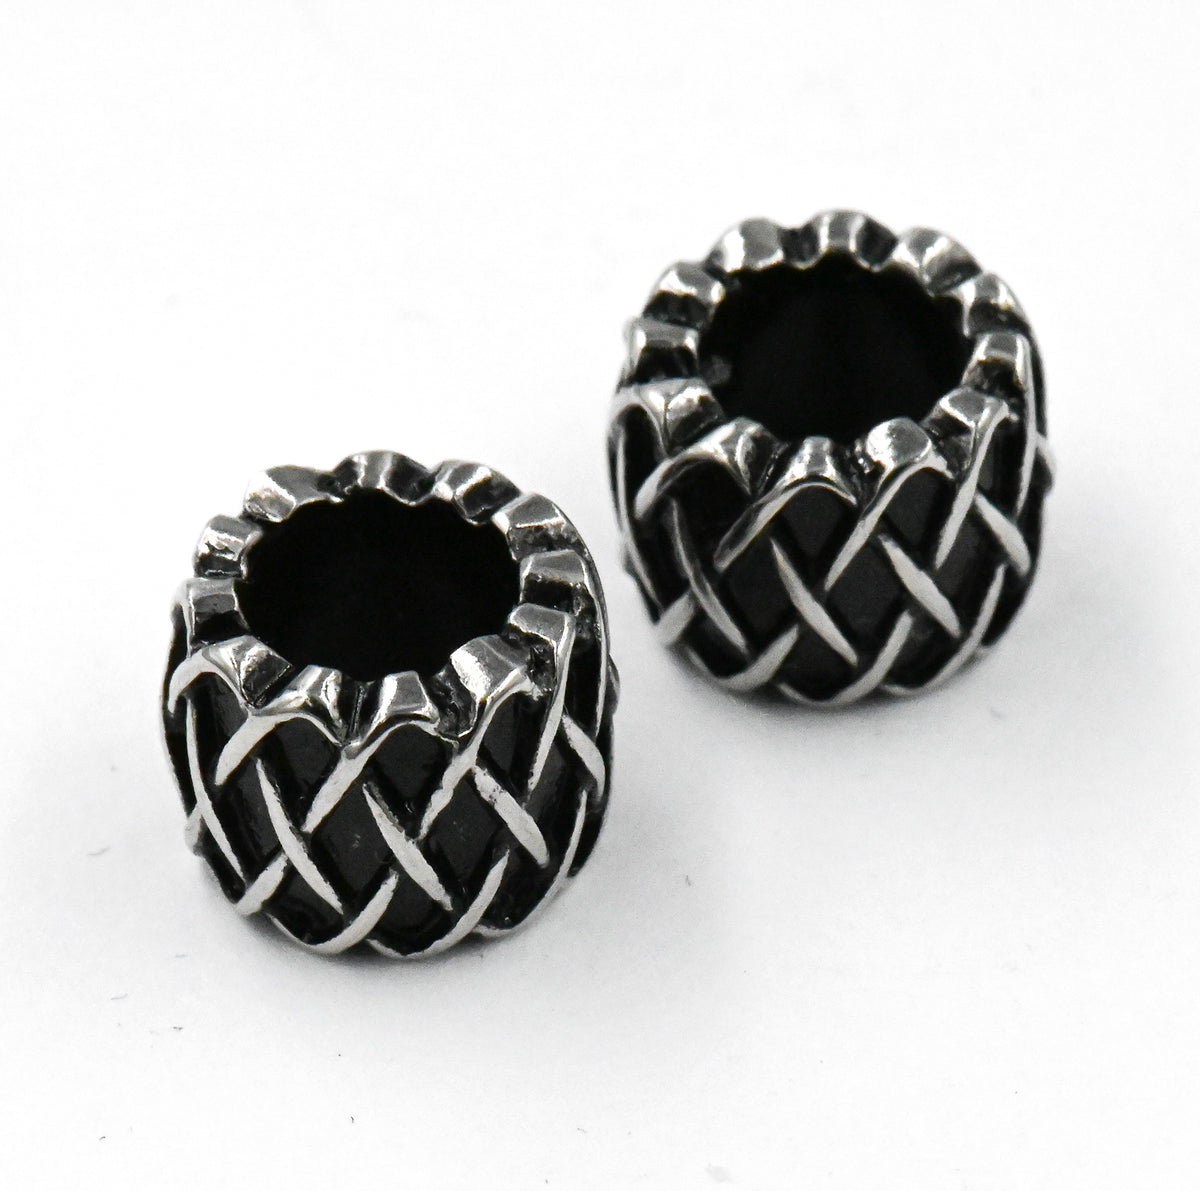 Stainless Steel Beads, 1pc, Retro Weave Pattern Large Hole Beads, 10.5x7.5mm Antique Silver